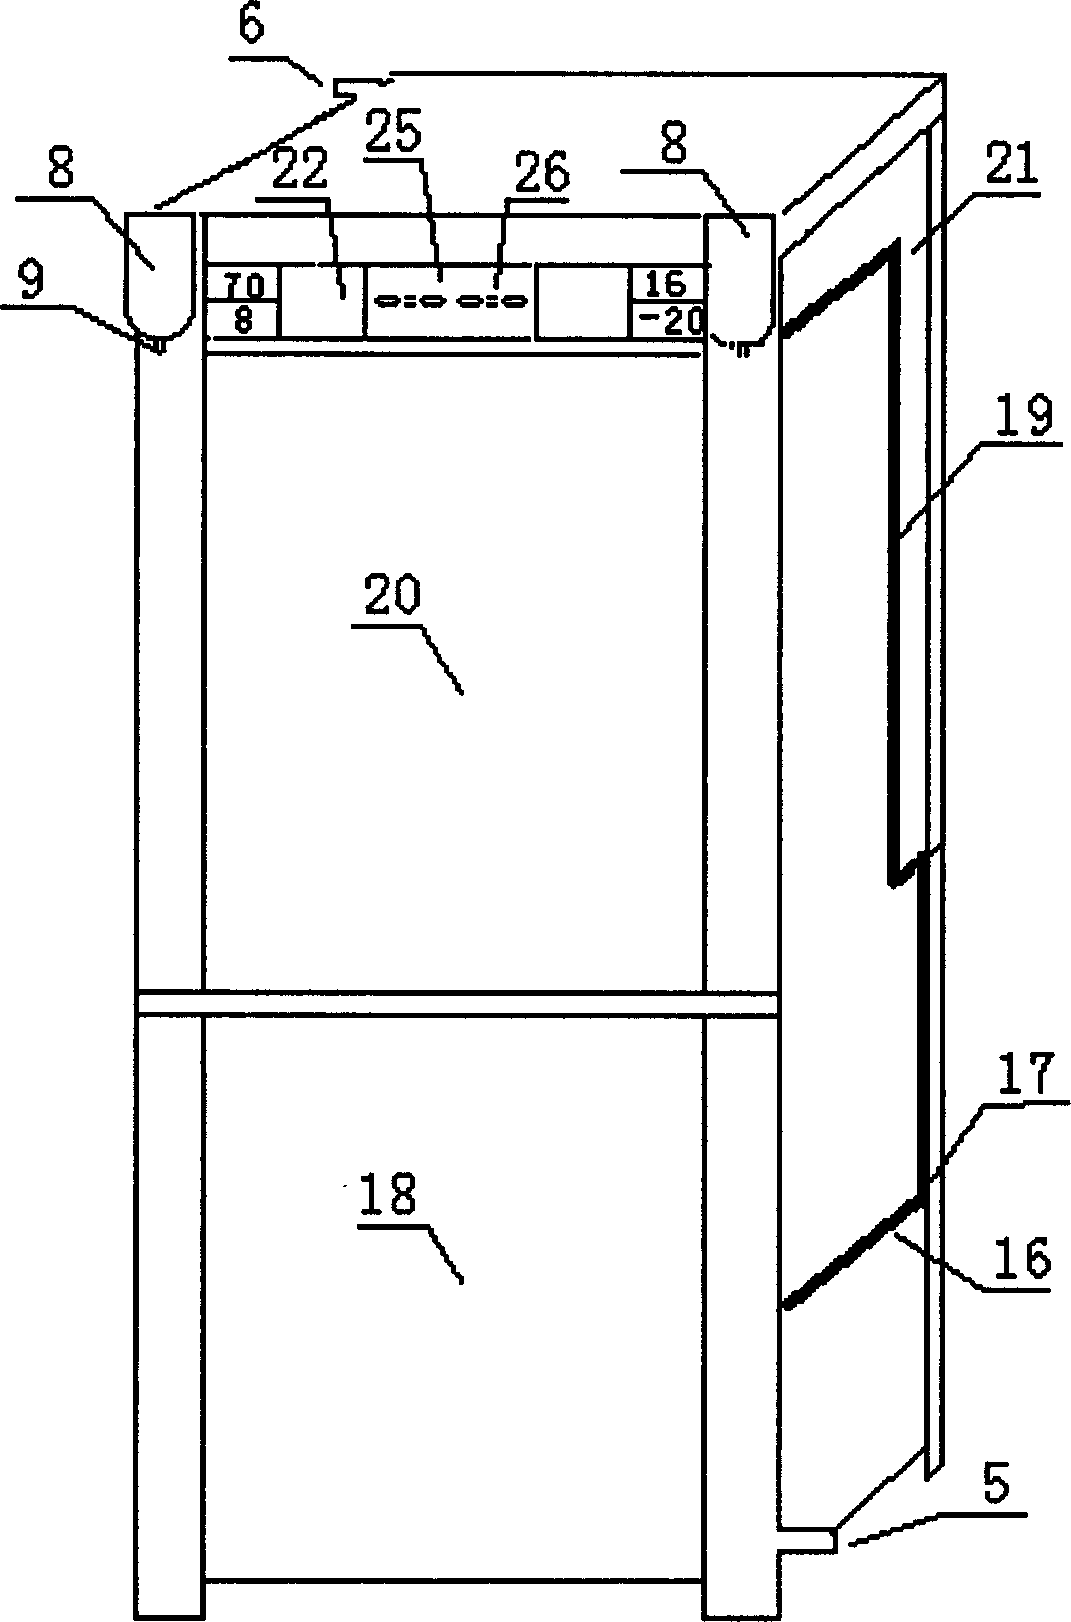 Four-in-one appliance of water heater, drinking water machine, air conditioner and refrigerator